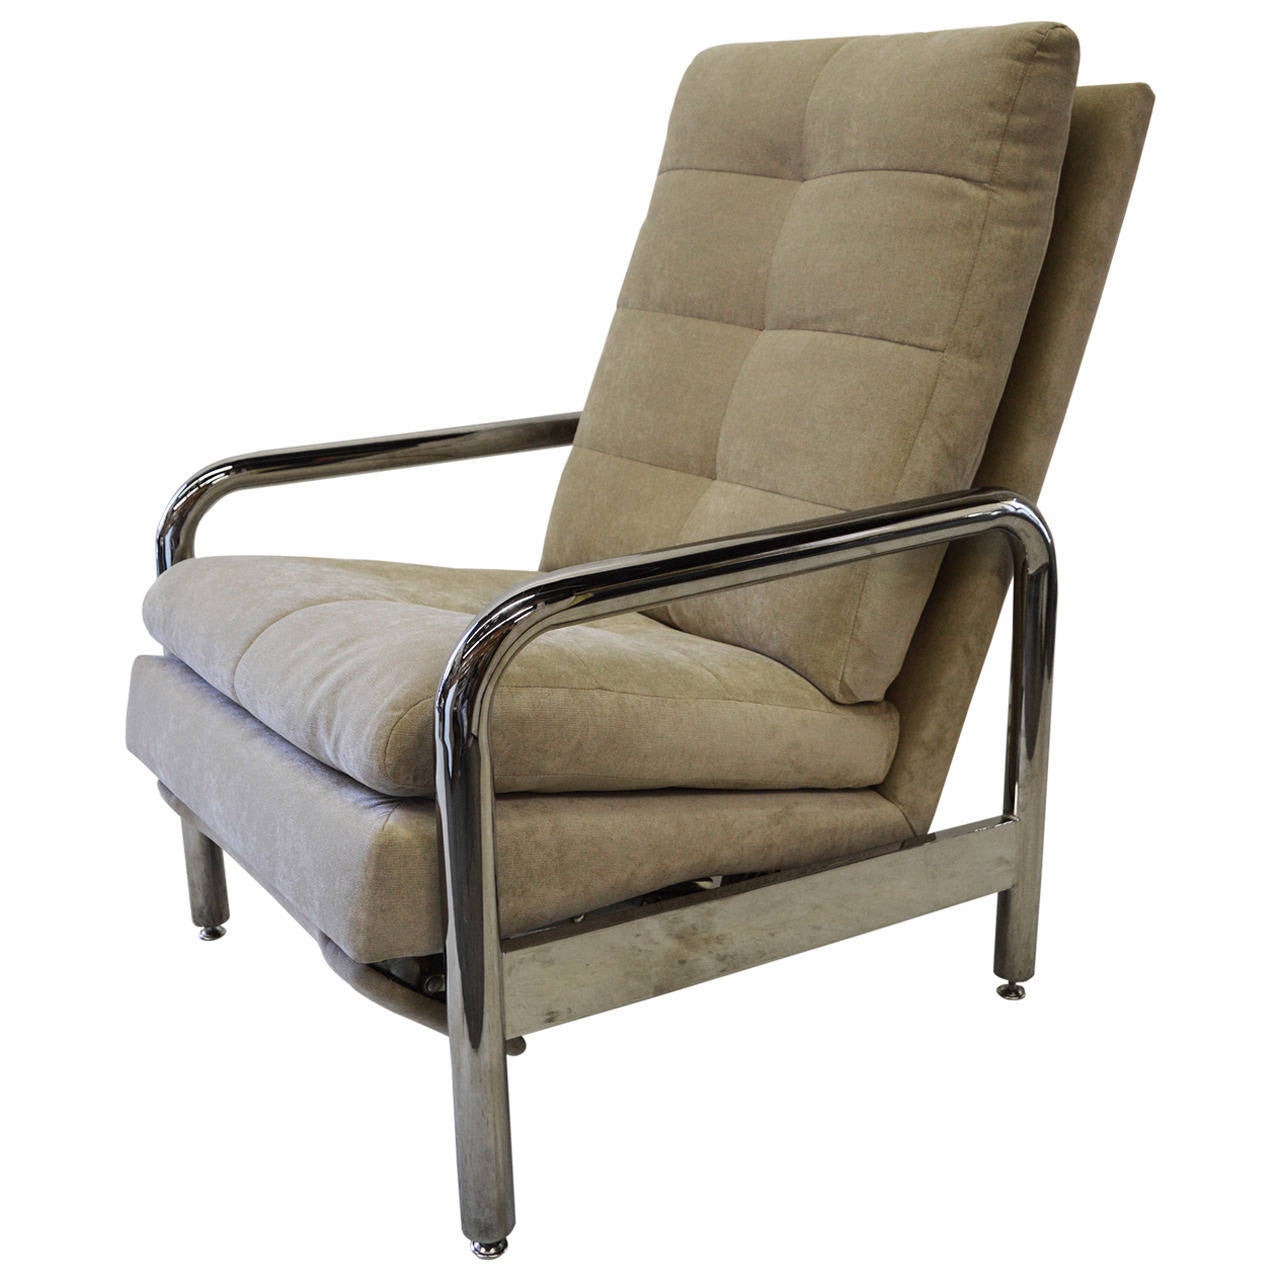 This chromed tubular lounge chair has been designed by Milo Baughman for Thayer Coggin. It retains the original label.
It reclines on to three different positions.
The feet are adjustable (perfect for an uneven floor).
It has been re-upholstered